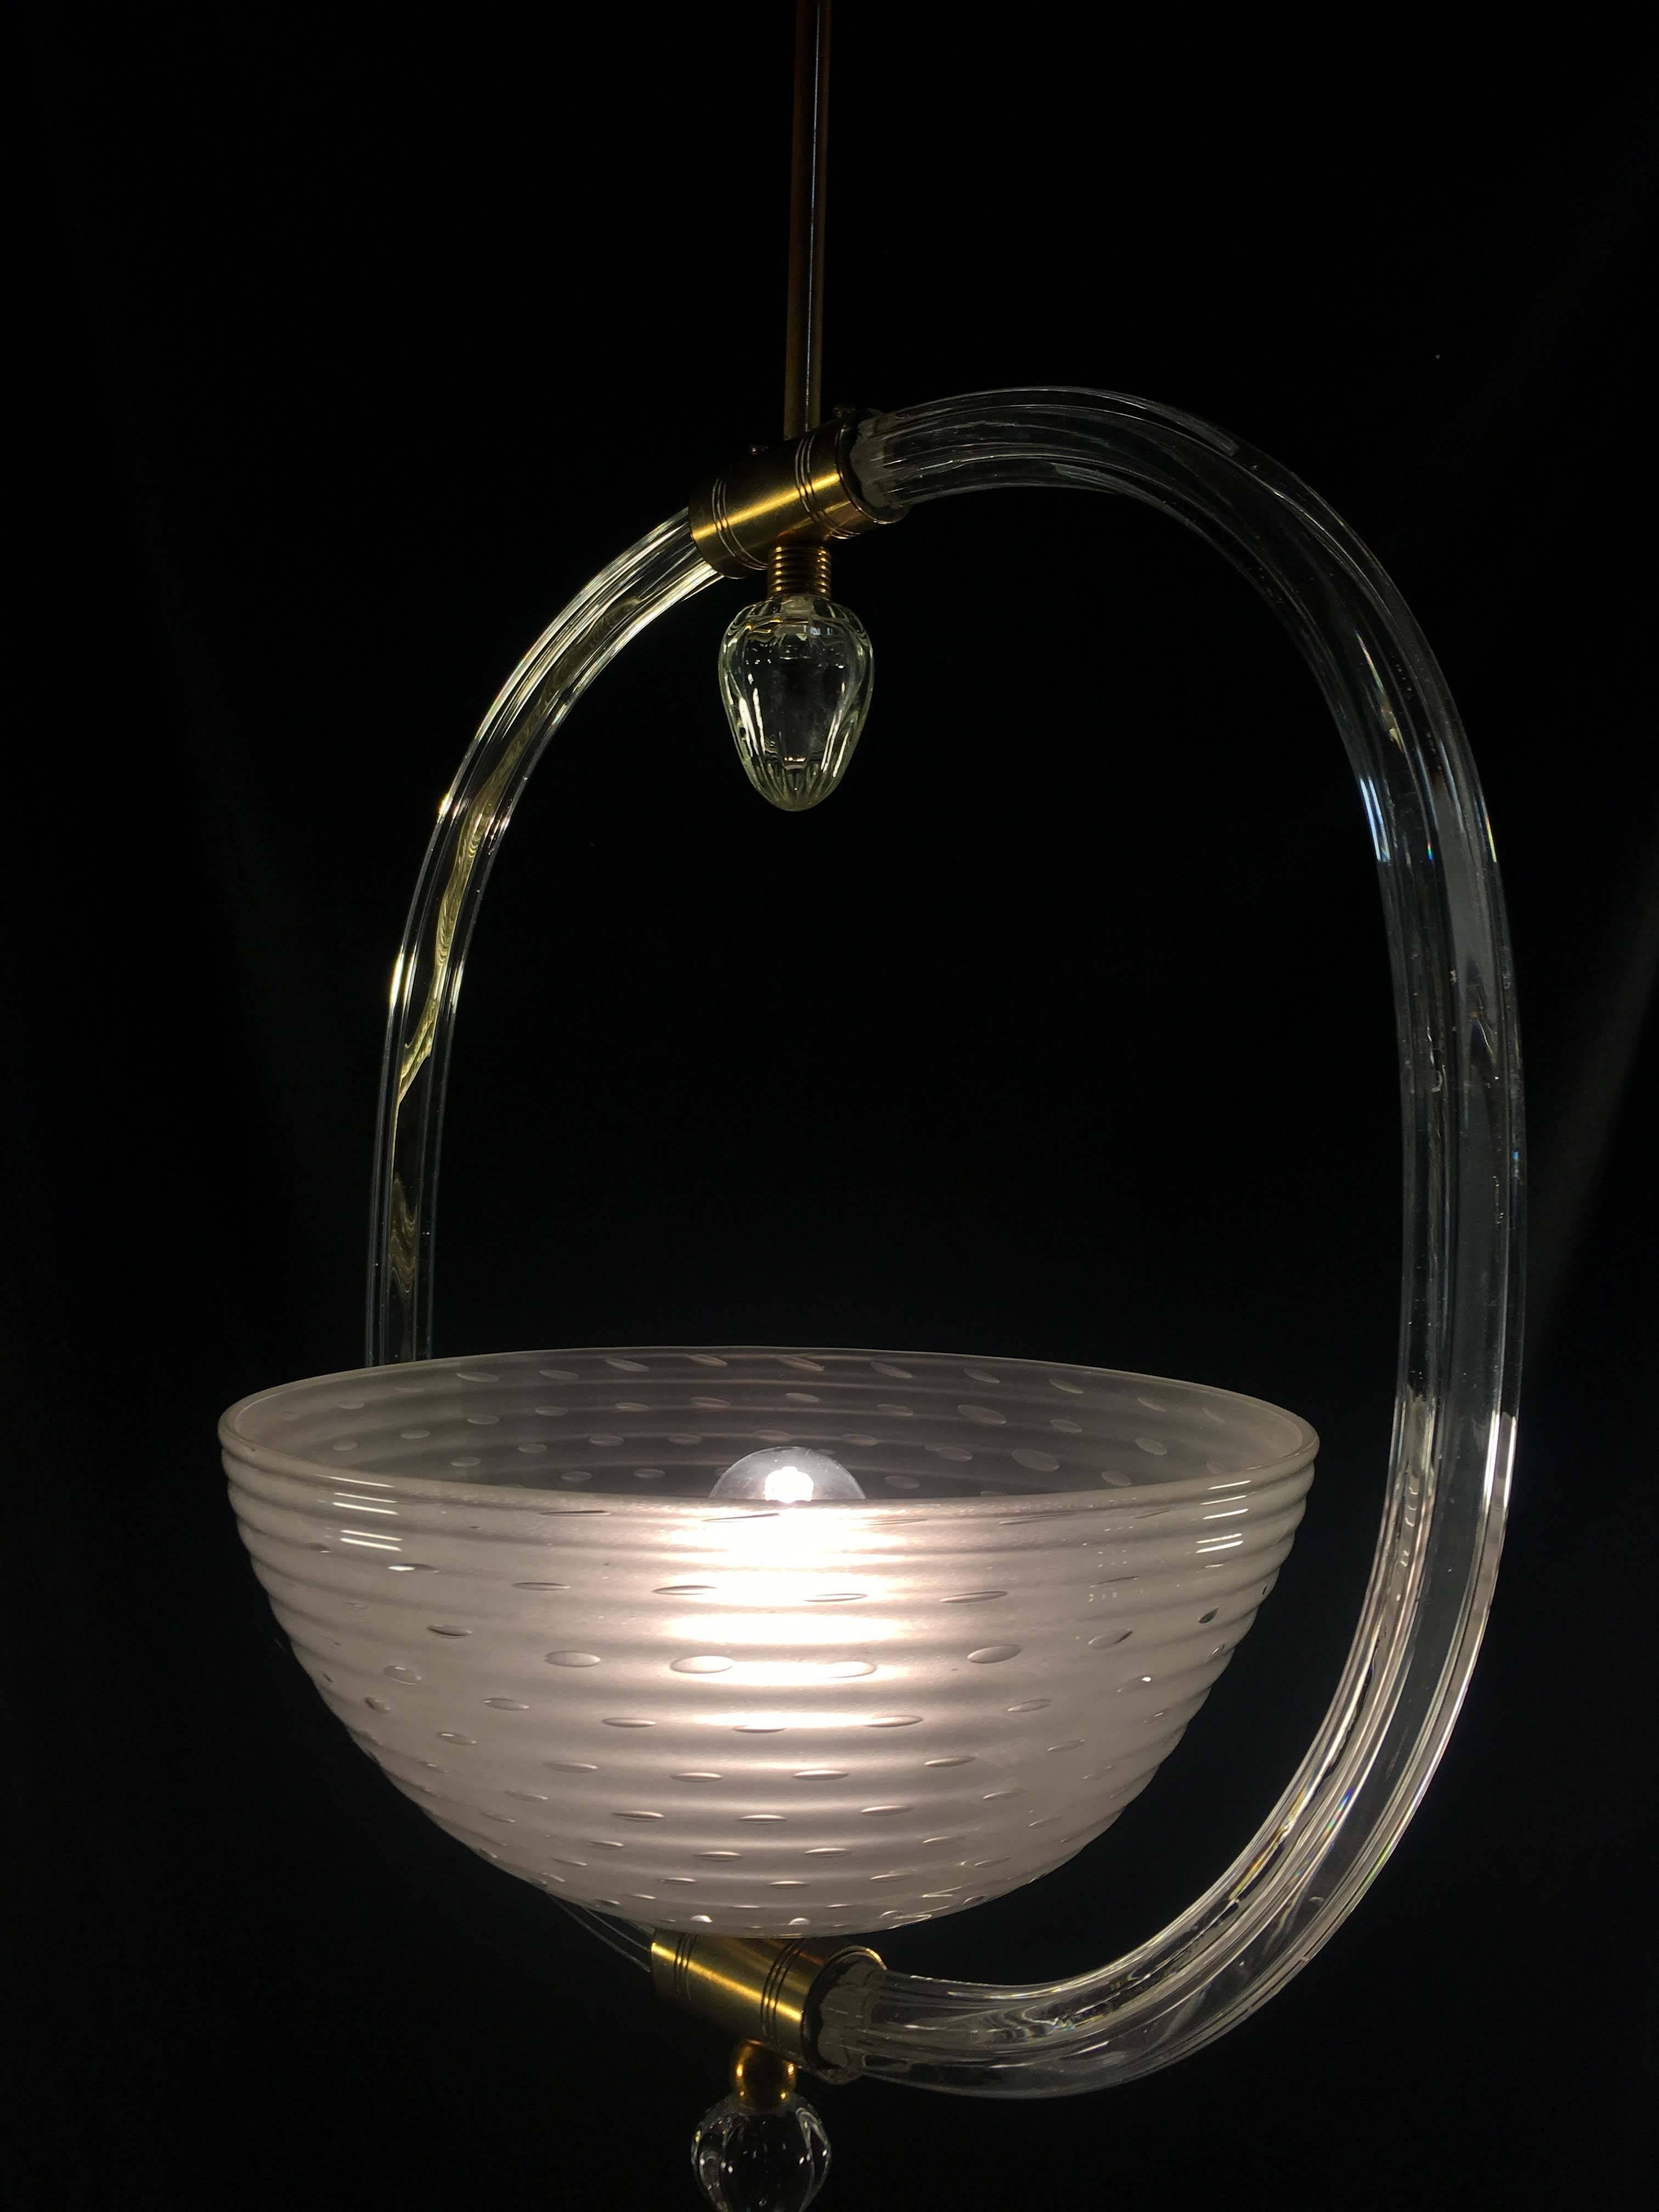 Charming Italian Chandelier by Barovier & Toso, Murano, 1940 For Sale 4